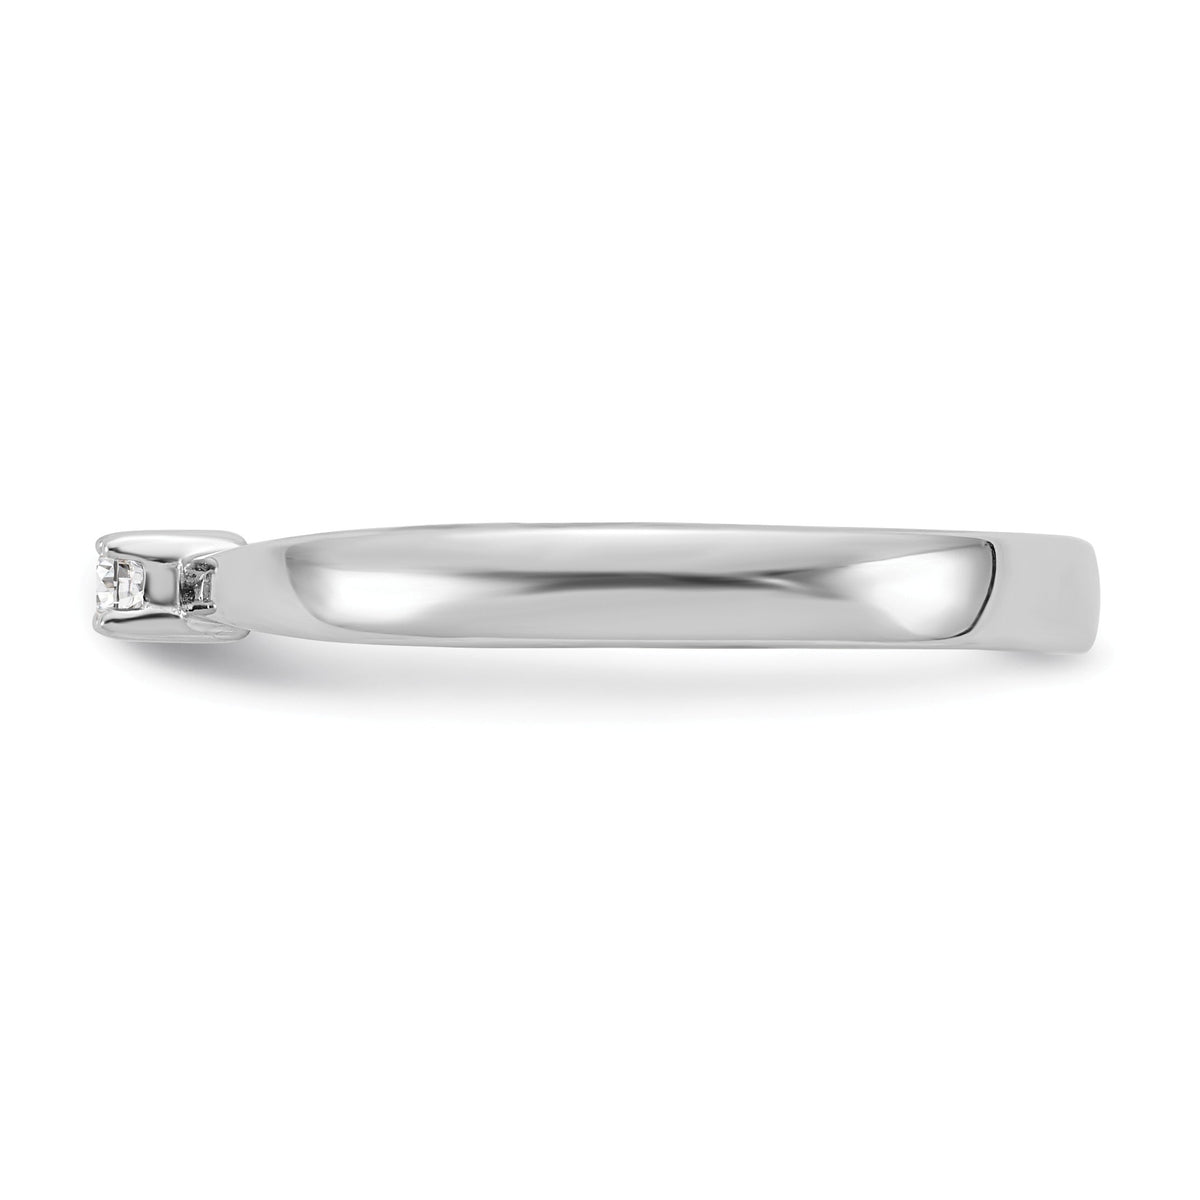 Alternate view of the .03 Carat Diamond Solitaire Ring in Rhodium Plated Sterling Silver by The Black Bow Jewelry Co.